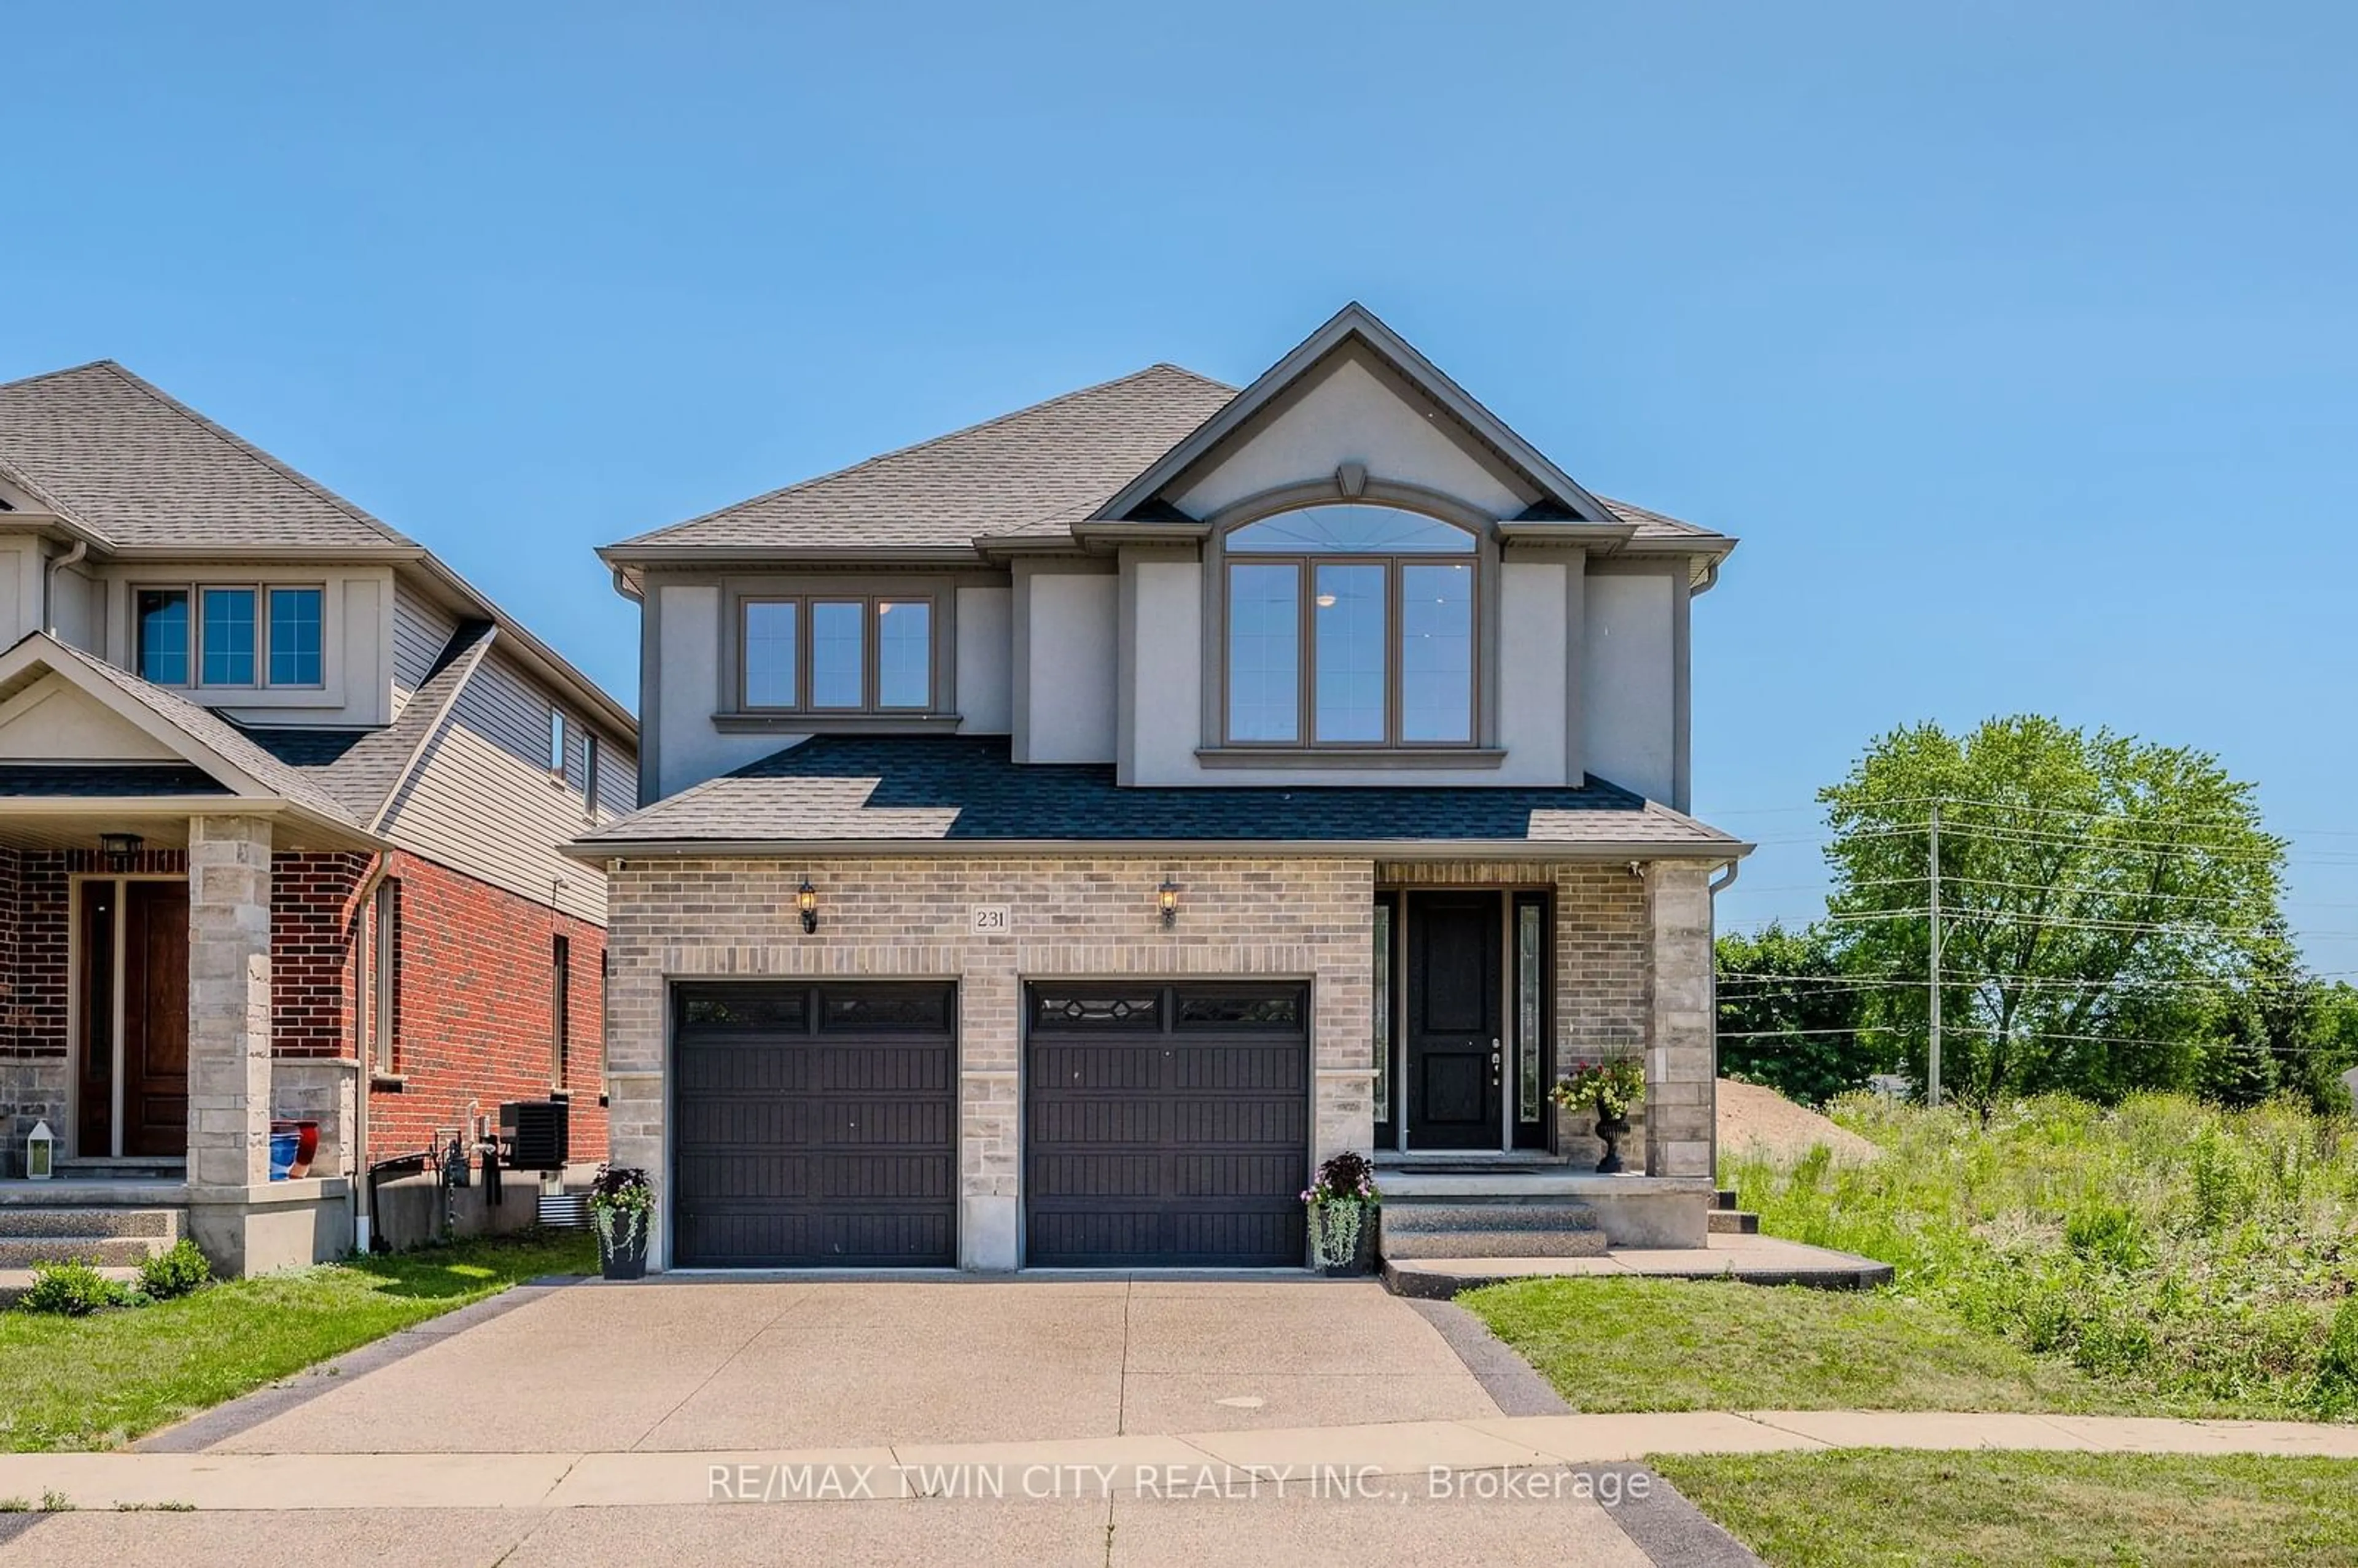 Home with brick exterior material for 231 Carriage Way, Waterloo Ontario N2K 0C6